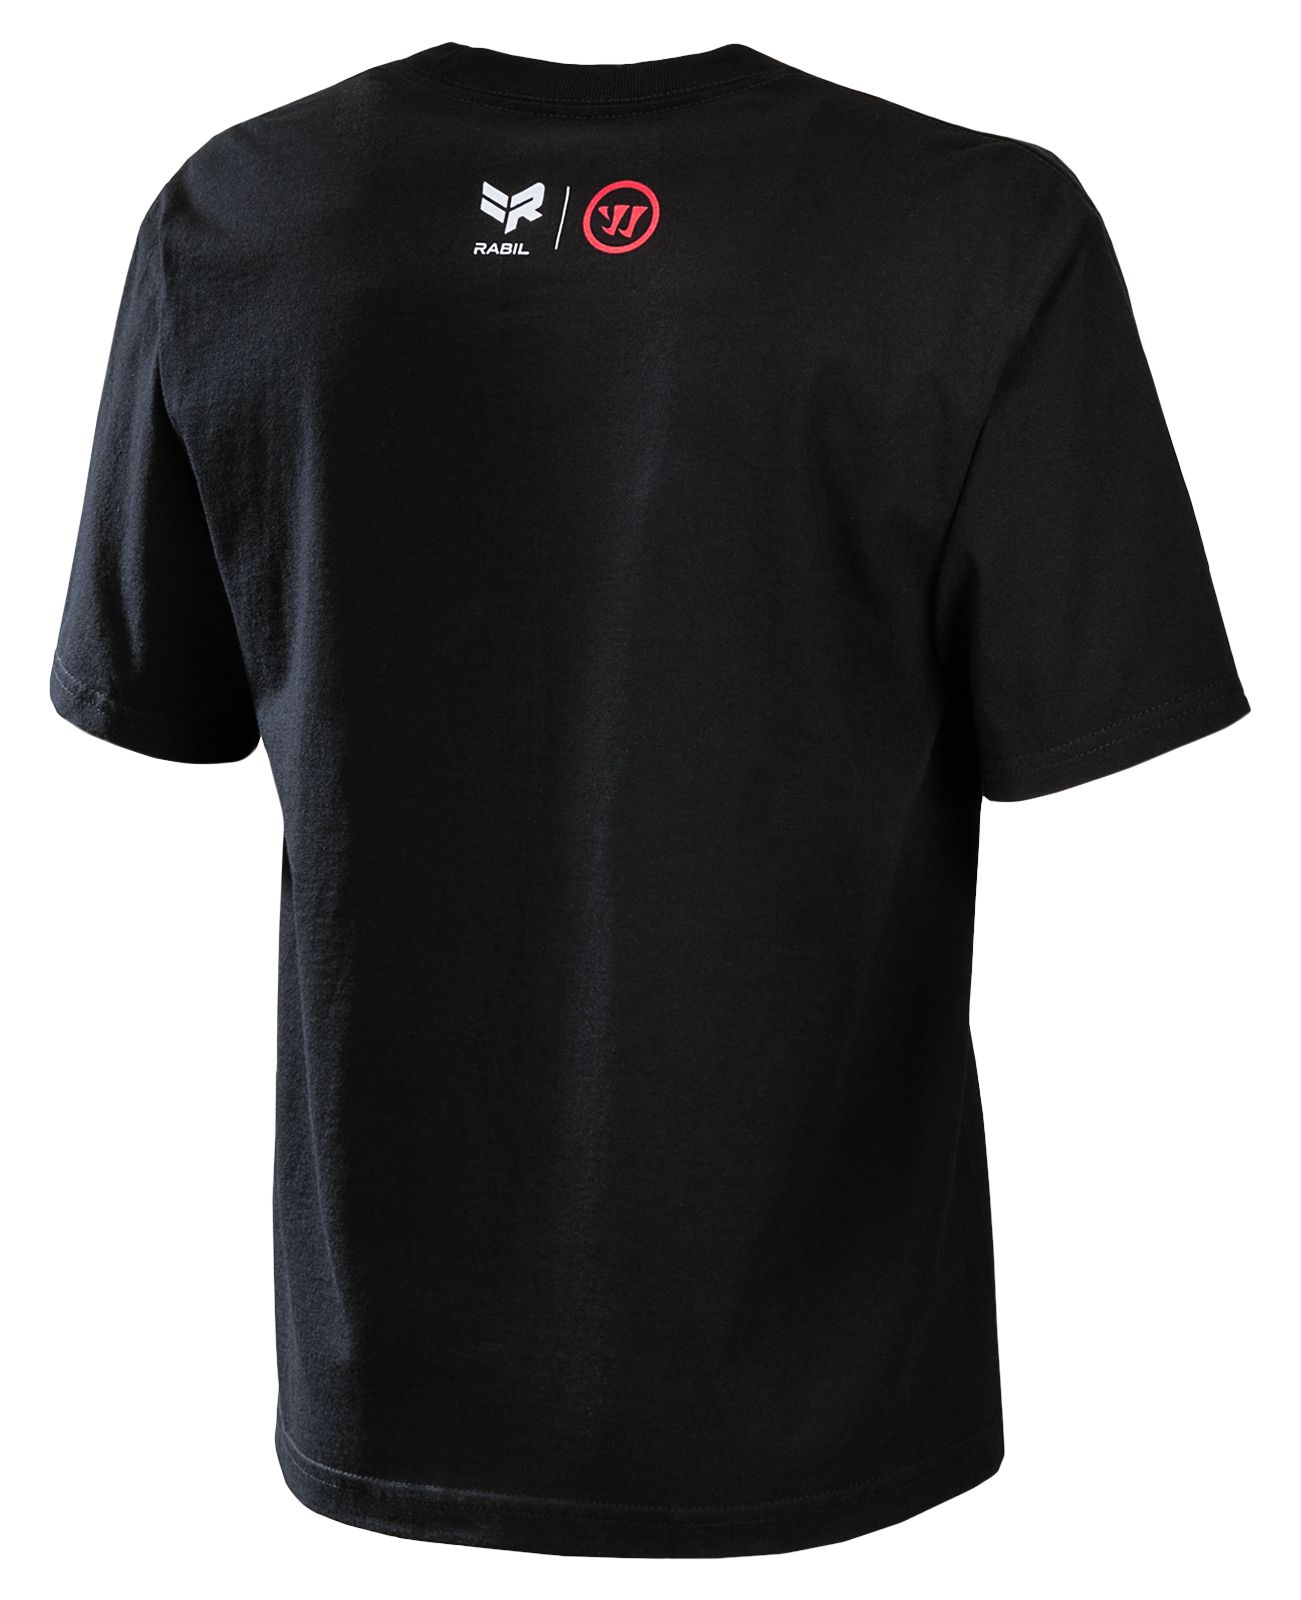 Youth Rabil Tee,  image number 0